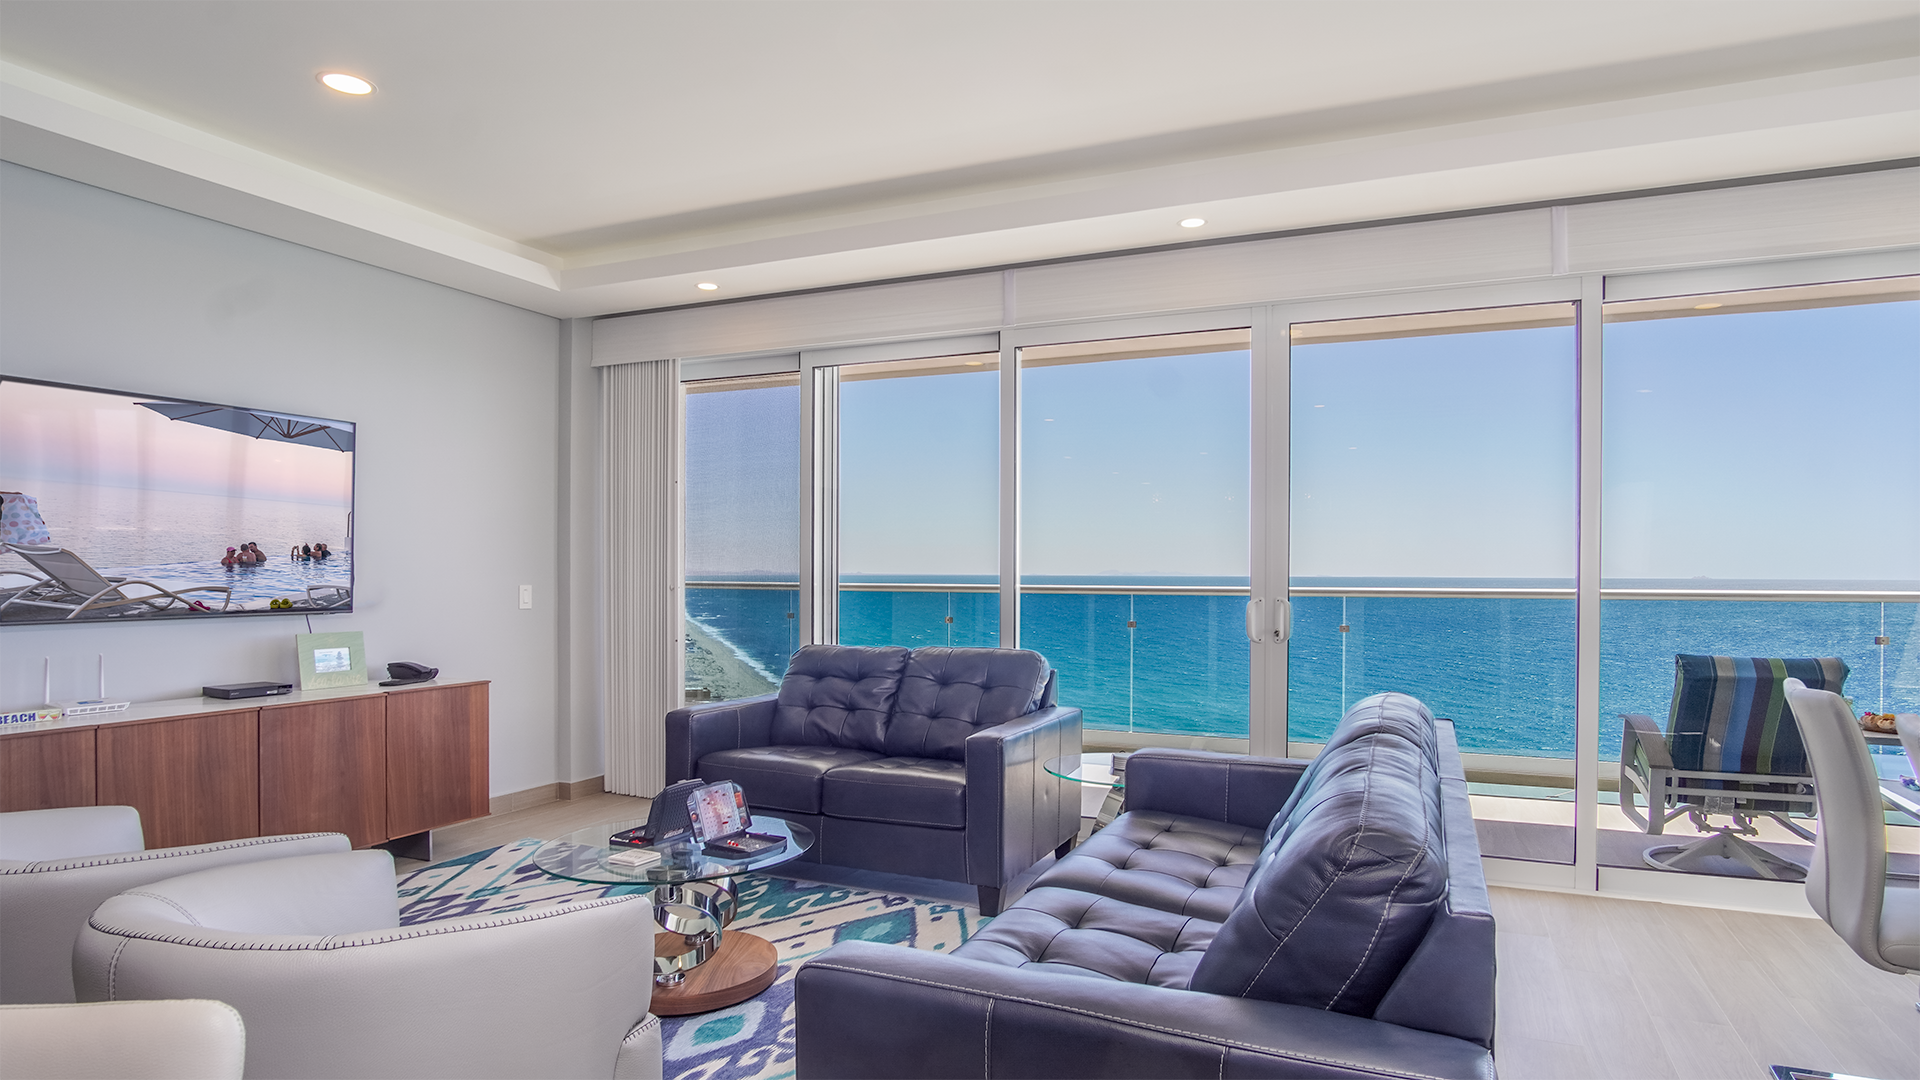 Beautiful ocean views from the living room with its comfy leather sofas, and stylish barrel chairs.